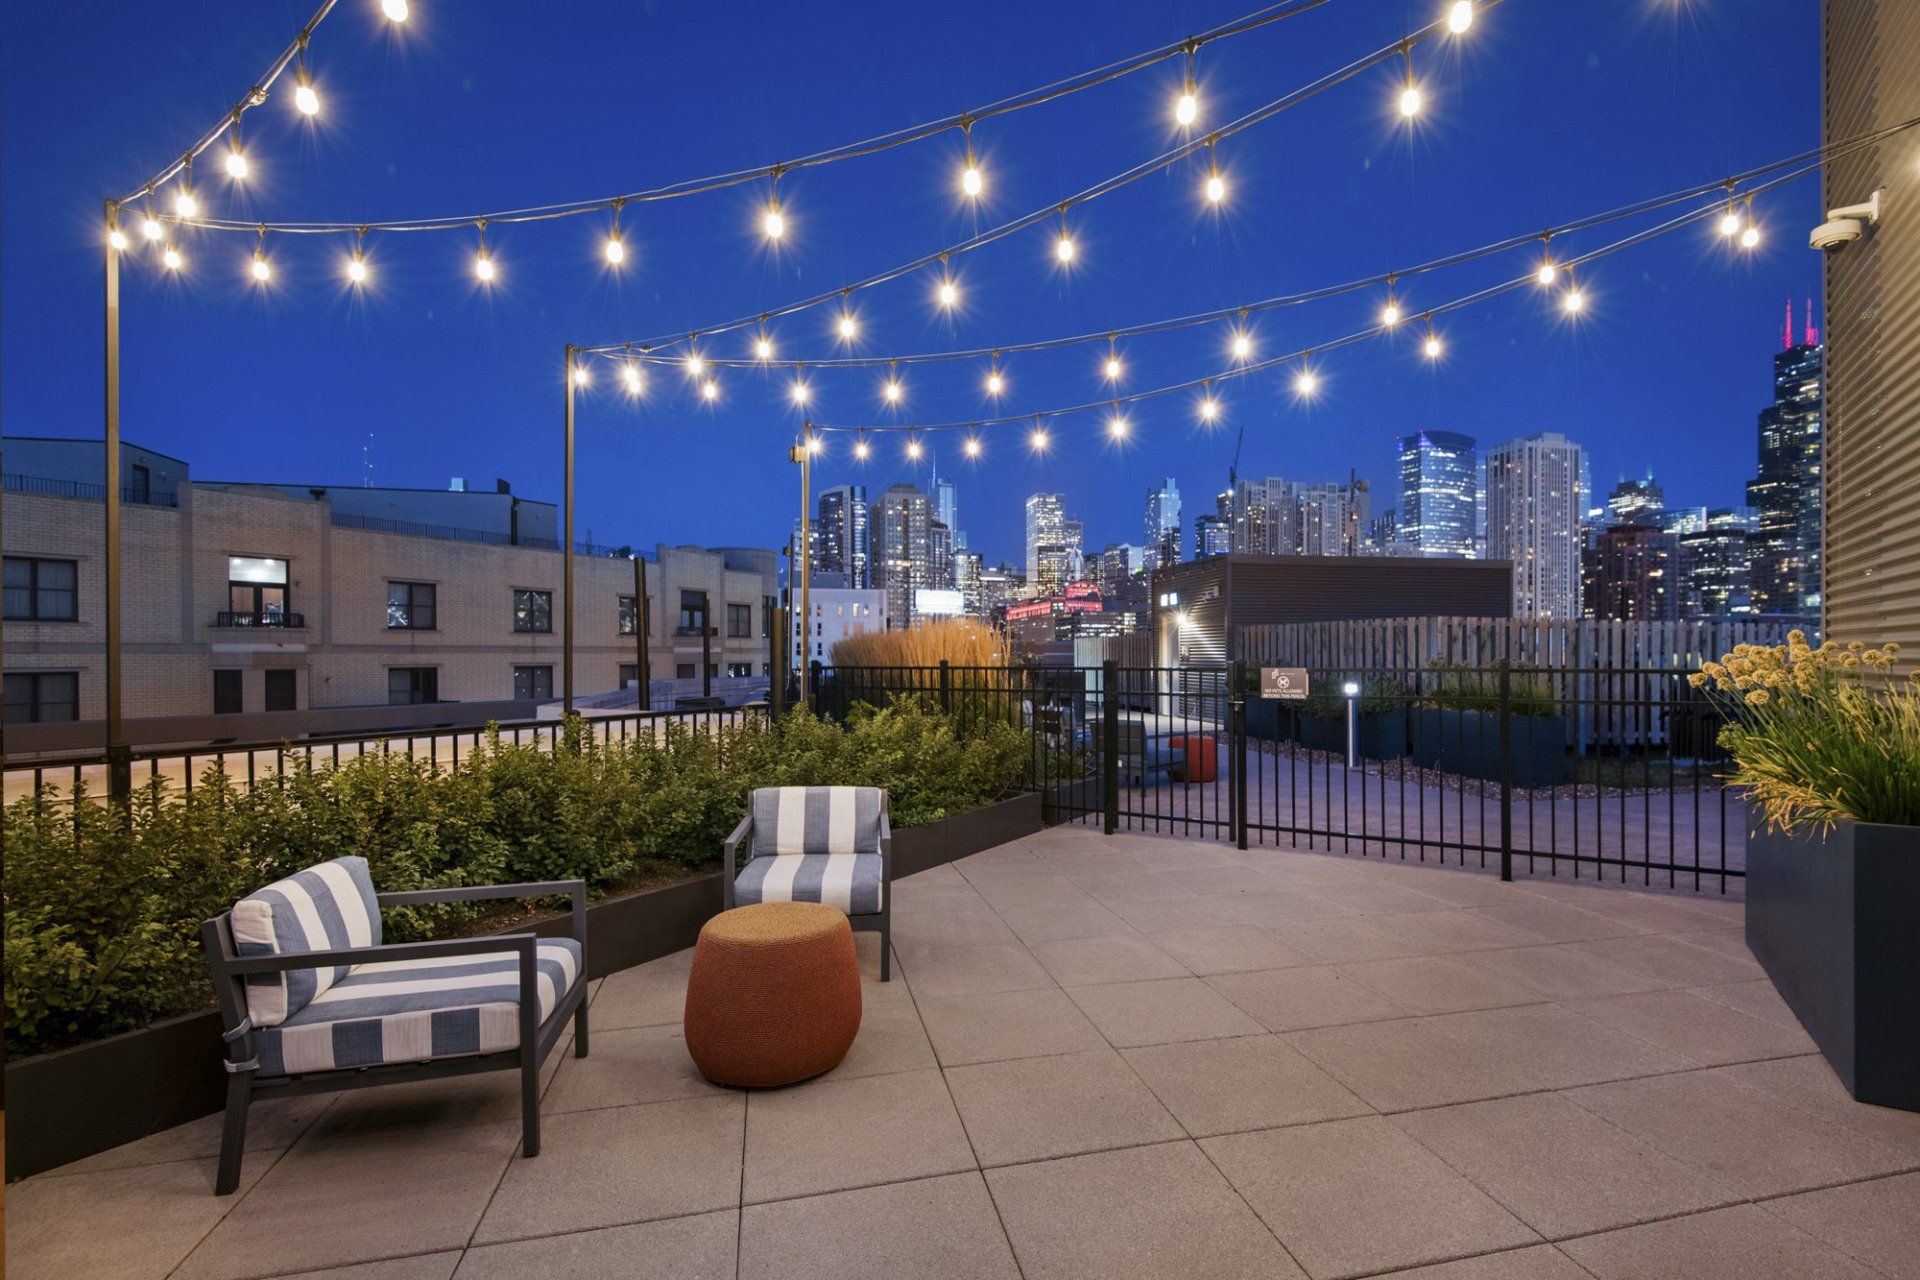 Outdoor lounge with lights at night at Reside on Green Street.